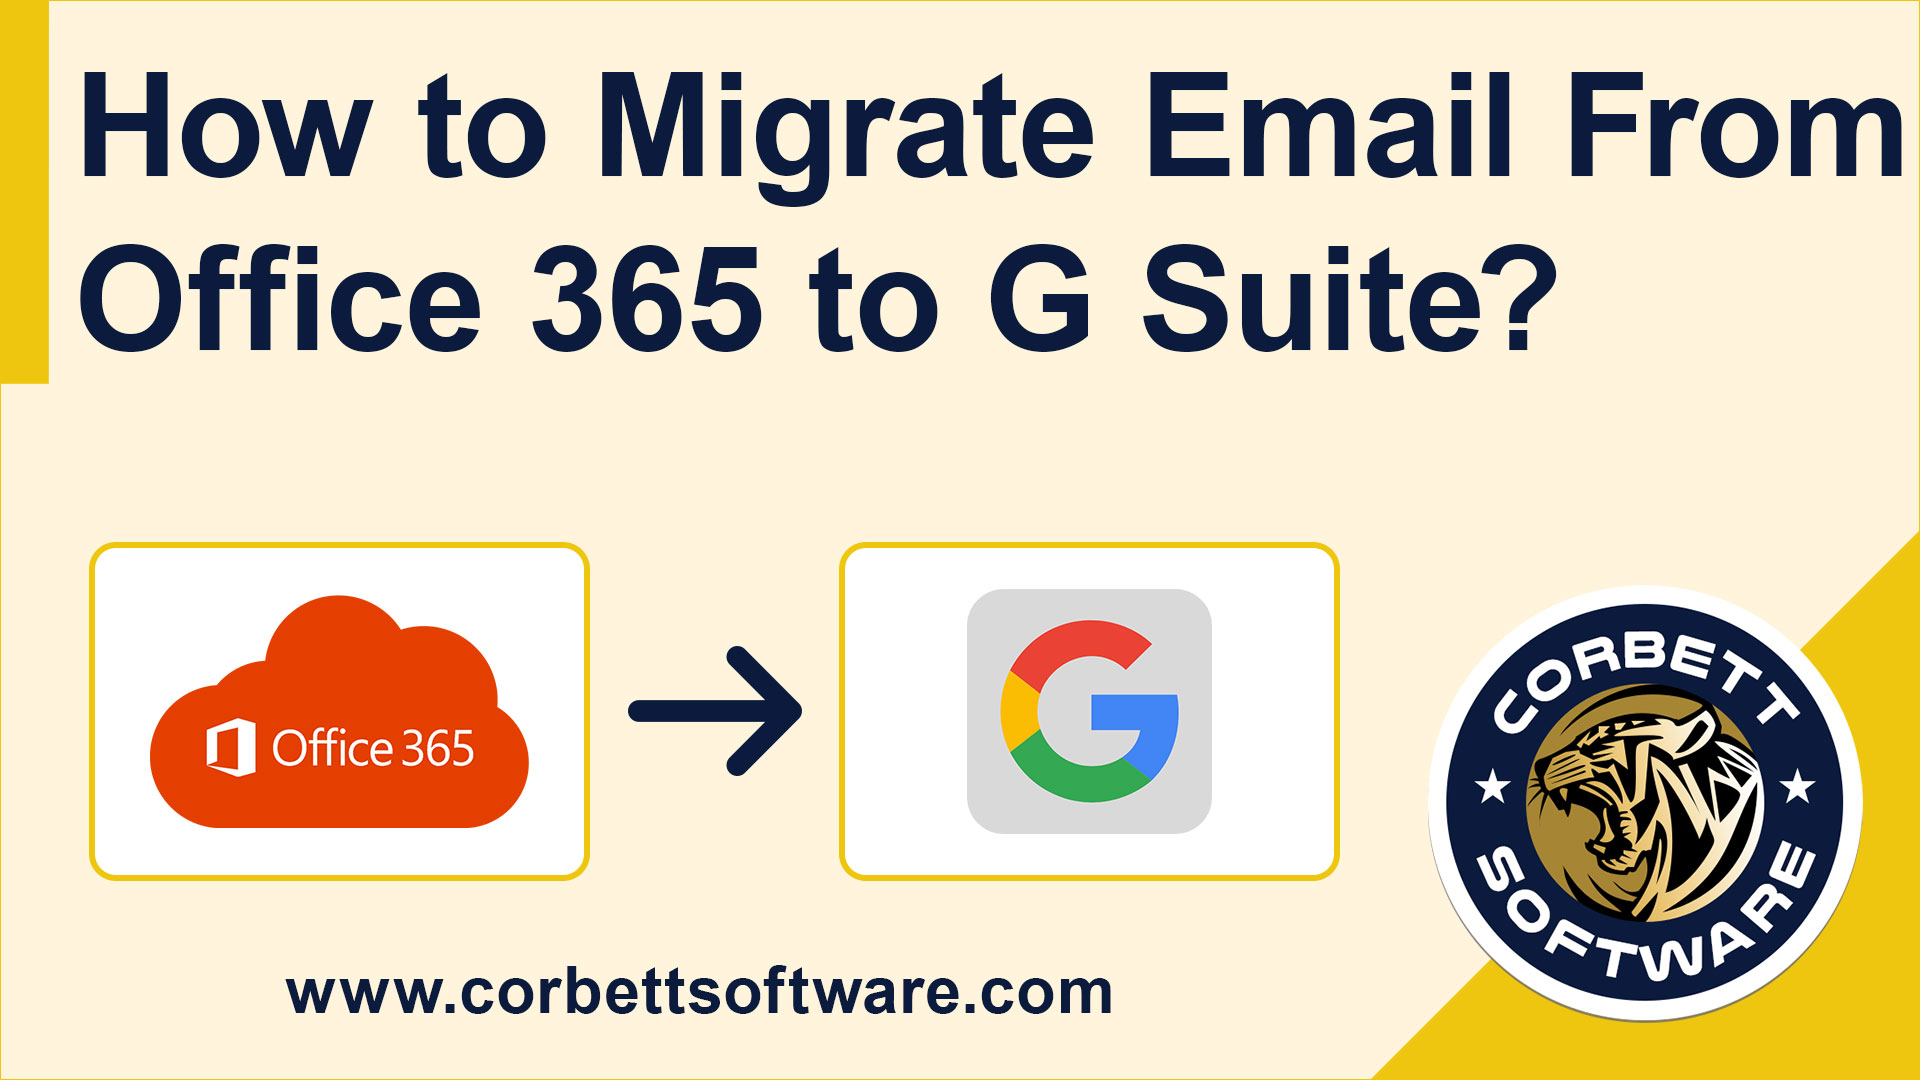 How to Migrate Email From Office 365 to G Suite? Quick Solution